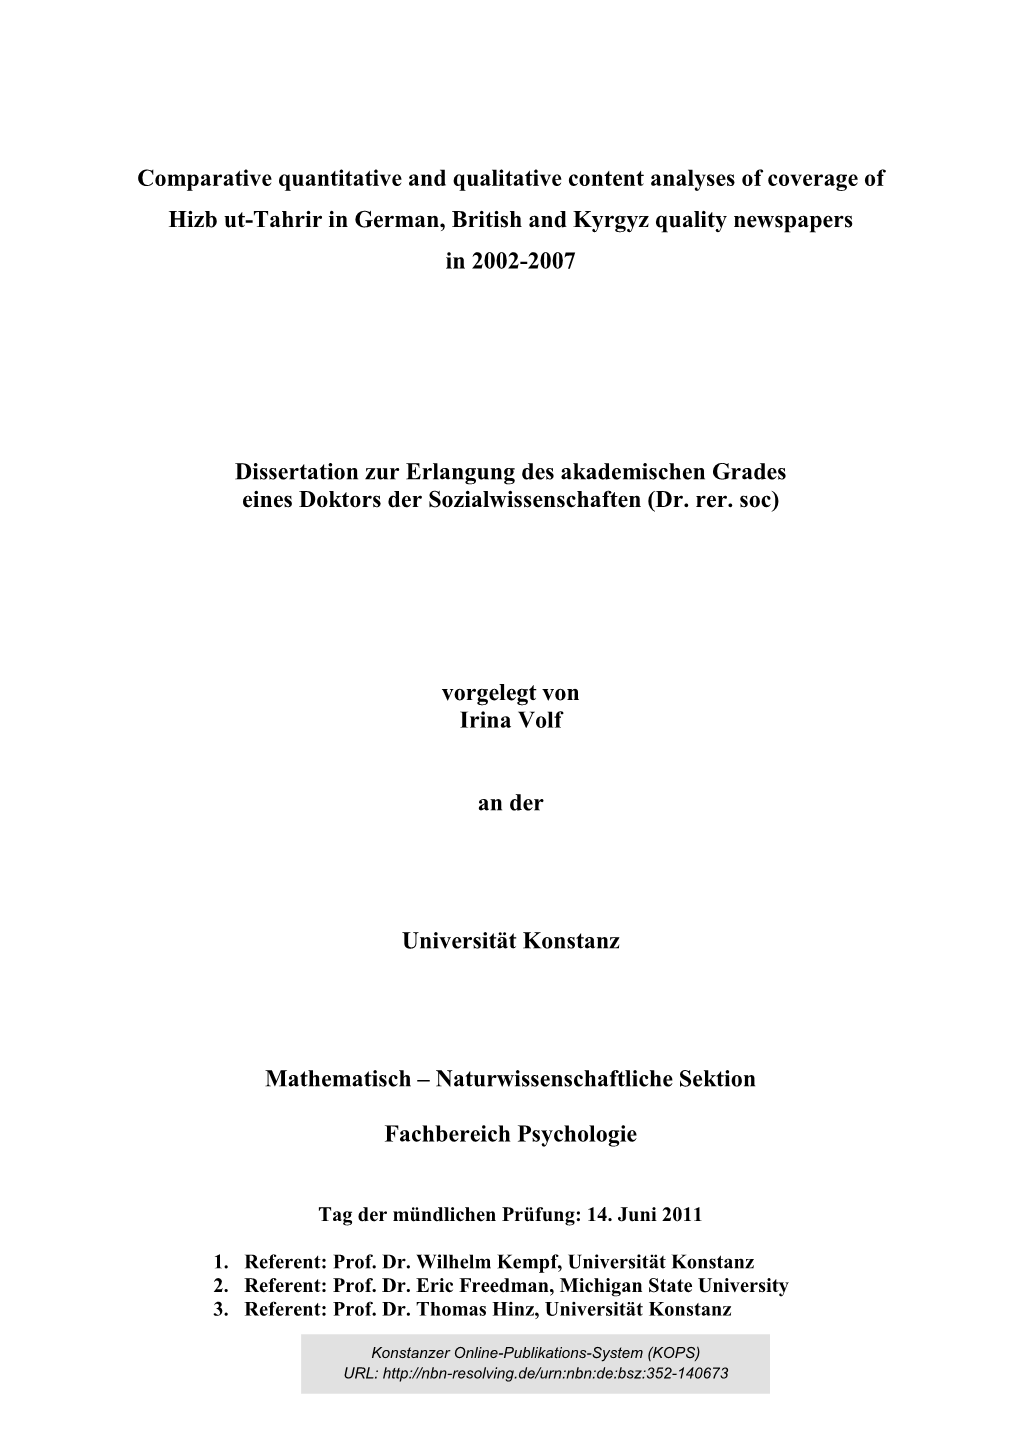 Comparative Quantitative and Qualitative Content Analyses of Coverage of Hizb Ut-Tahrir in German, British and Kyrgyz Quality Newspapers in 2002-2007